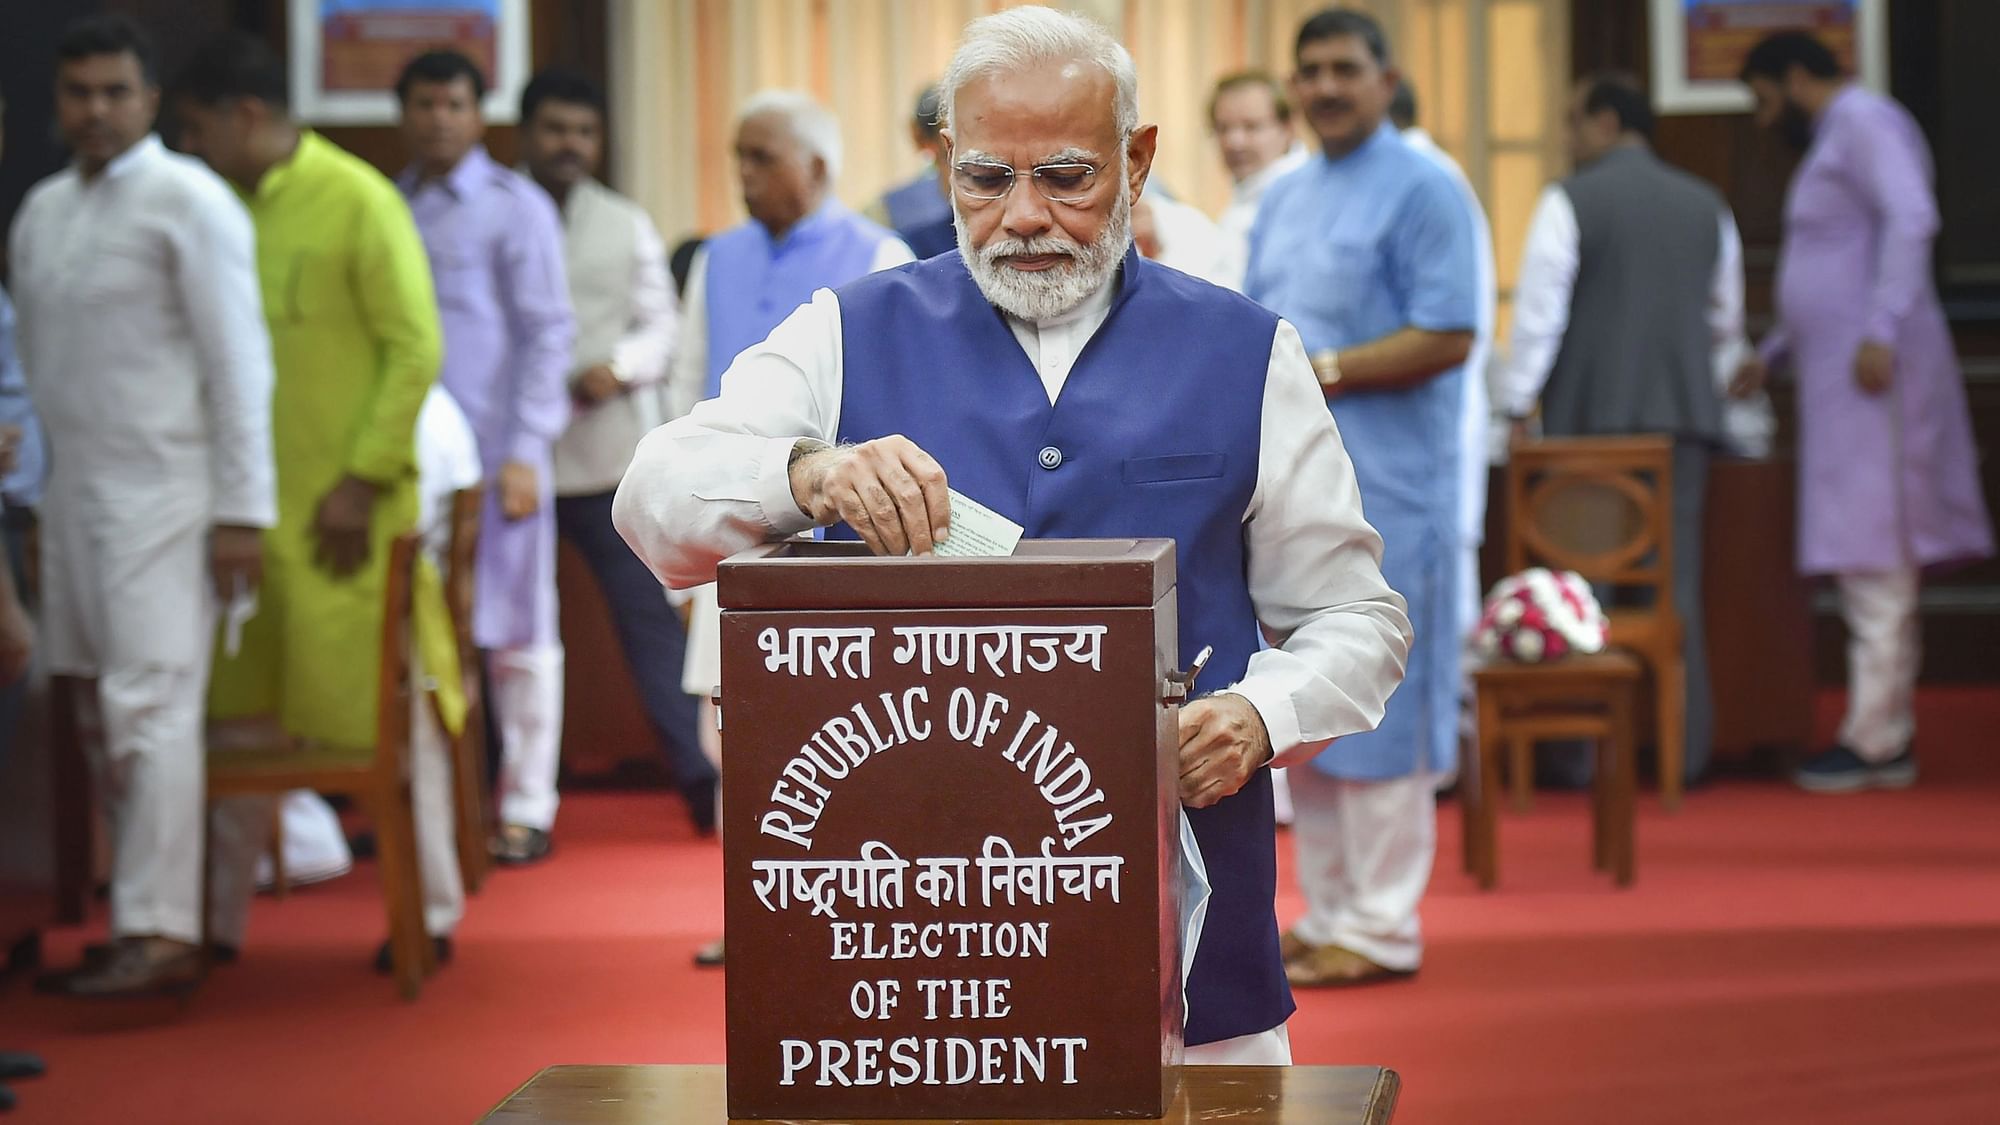 <div class="paragraphs"><p>New Delhi: Prime Minister Narendra Modi cast his vote for the election of the president, at Parliament House in New Delhi, on Monday, 18 July.</p></div>